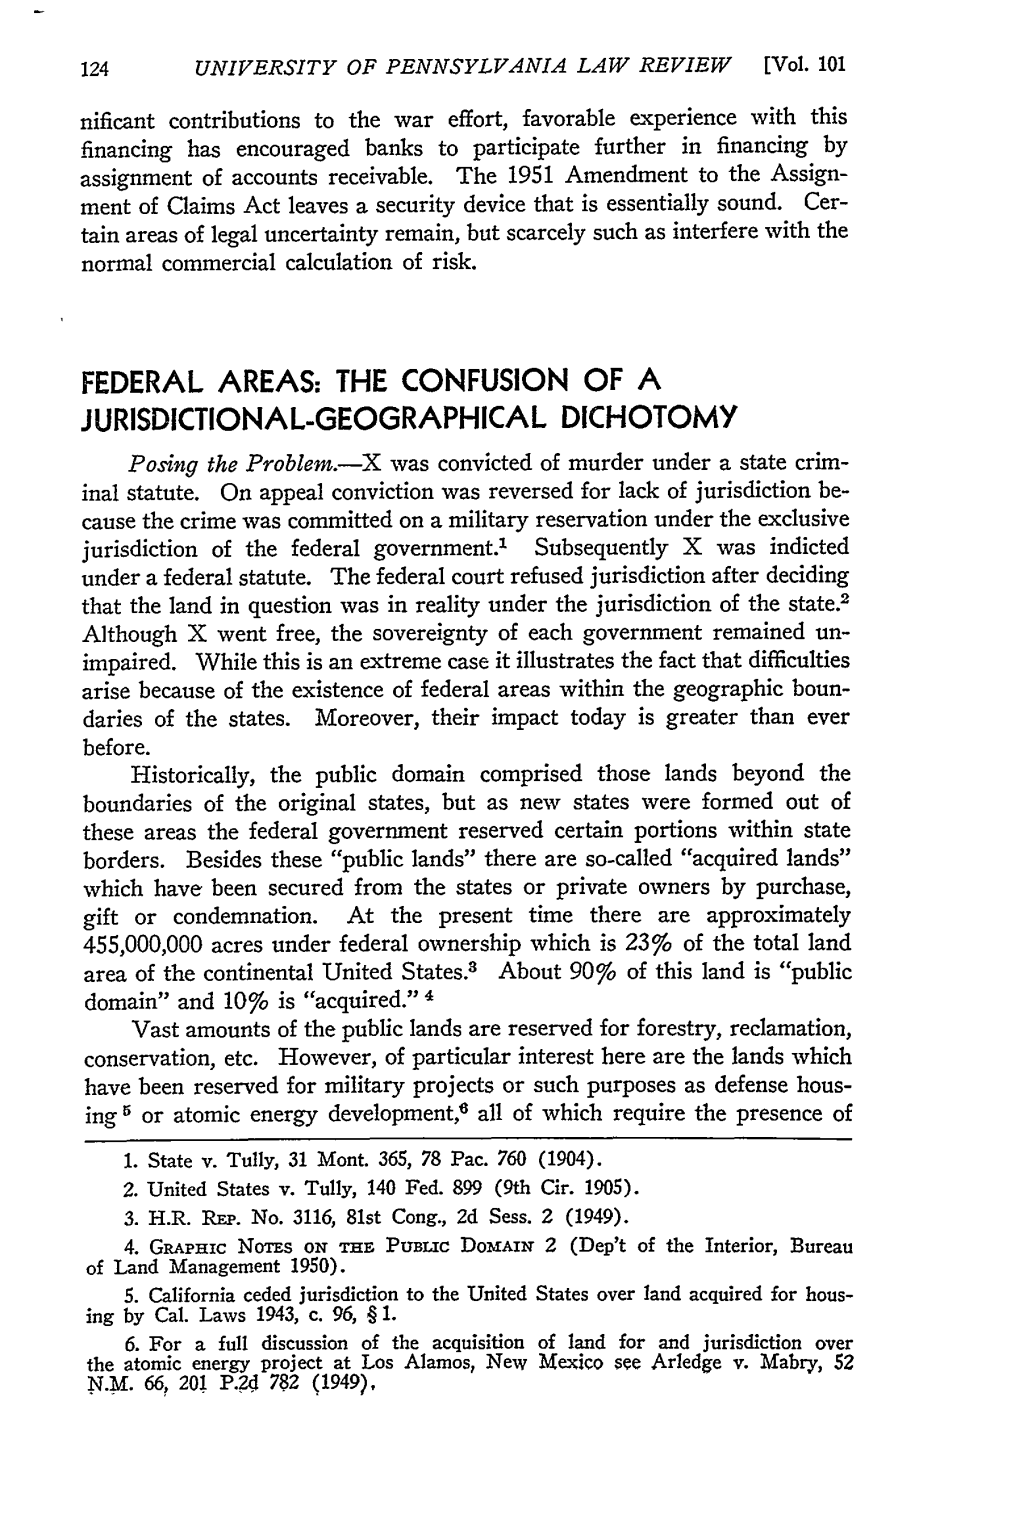 Federal Areas: the Confusion of a Jurisdictional Geographical